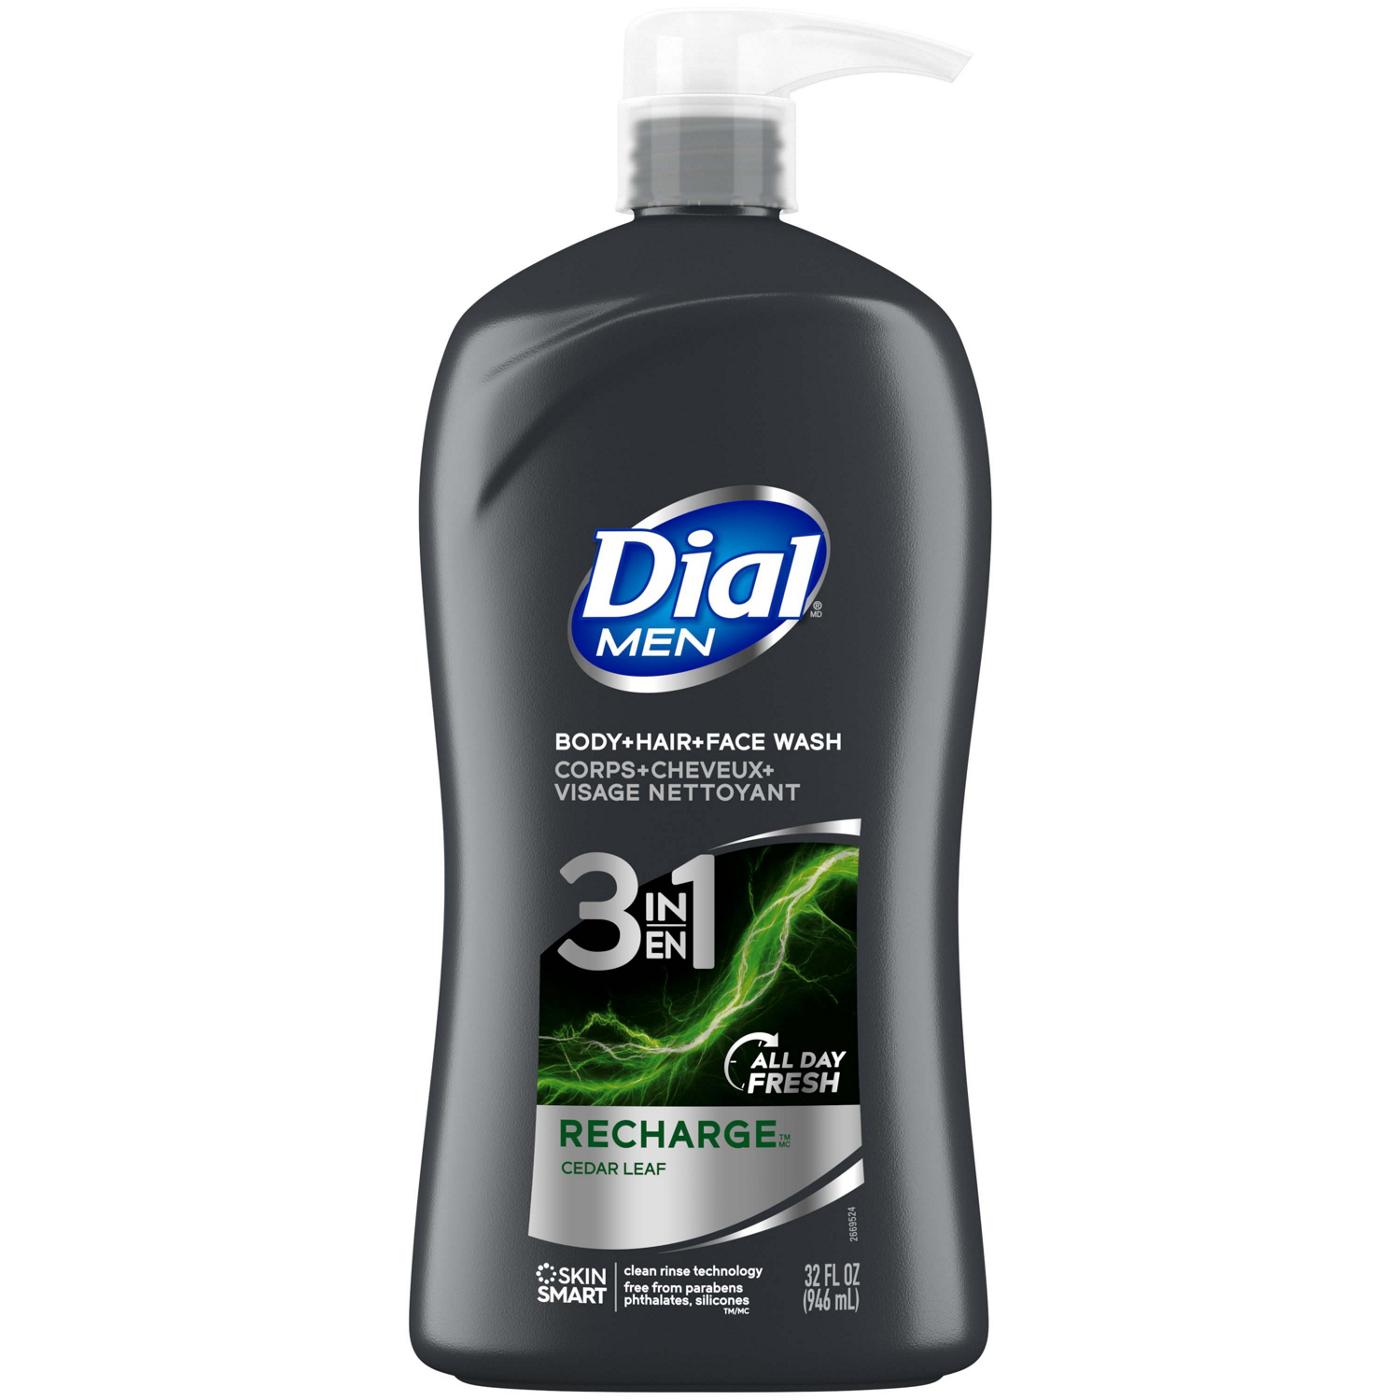 Dial Men 3in1 Body, Hair and Face Wash - Recharge; image 1 of 6